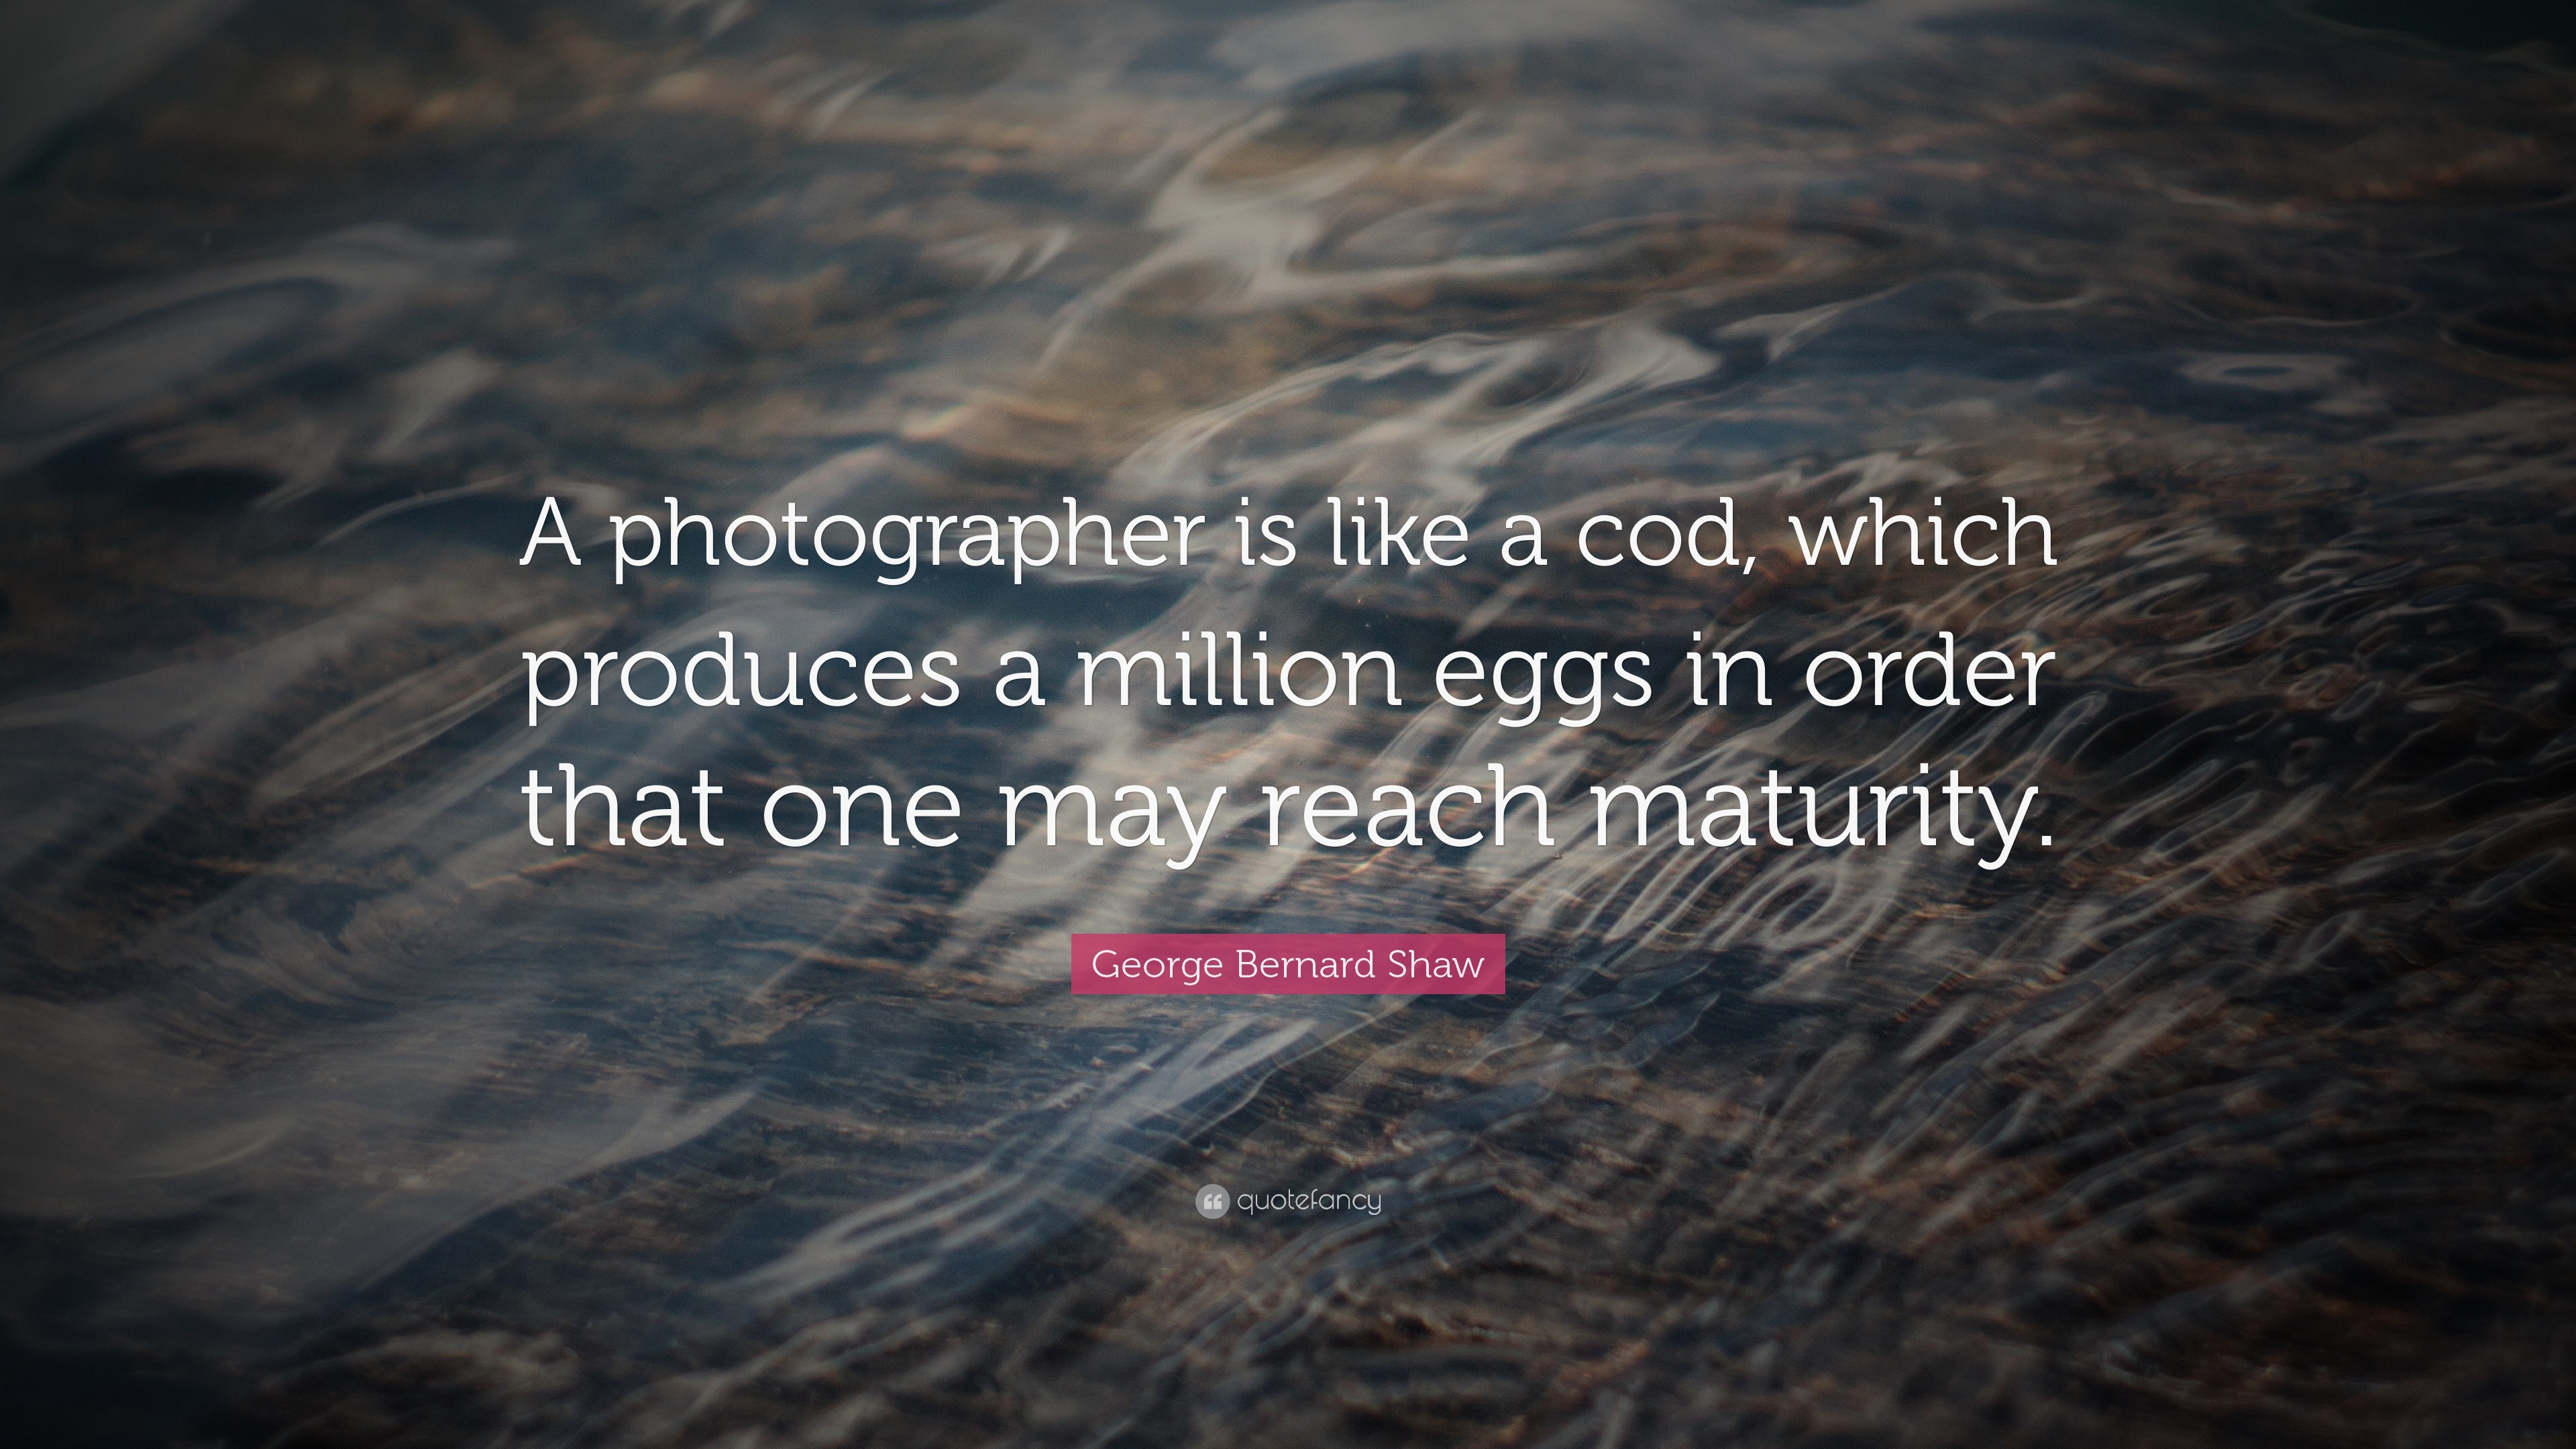 George Bernard Shaw Quote “A photographer is like a cod which produces a